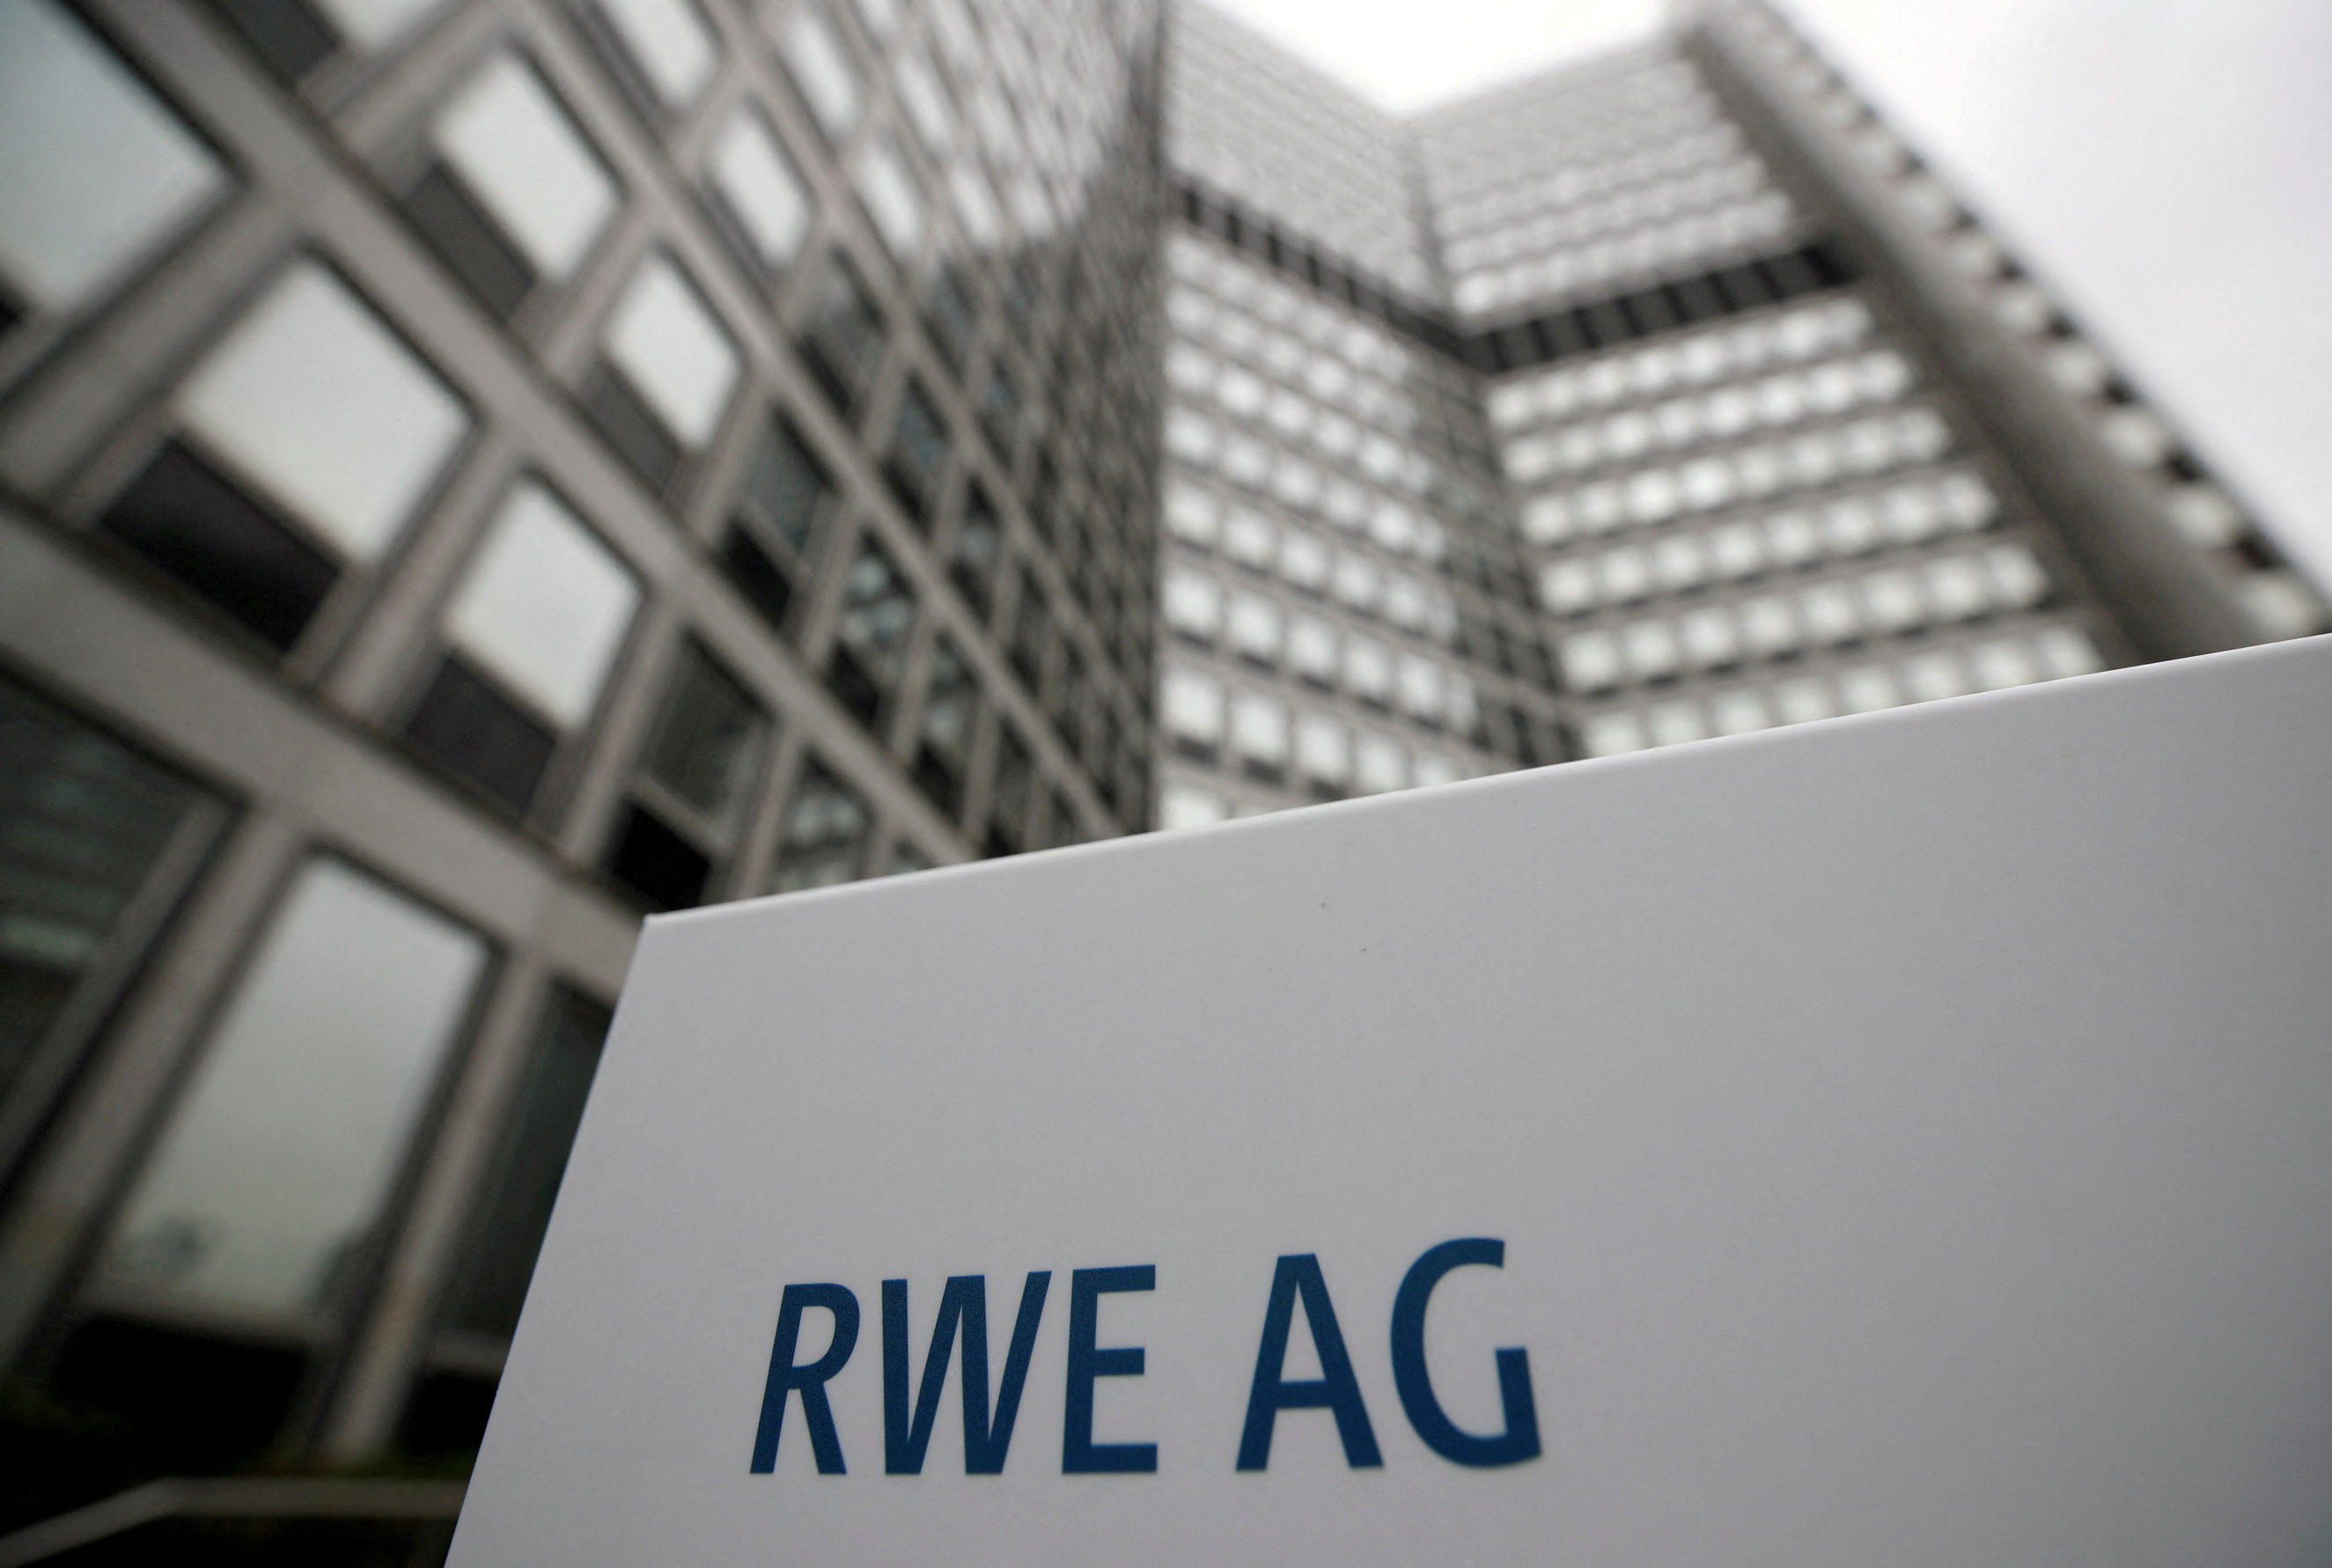 The headquarters of the German power supplier RWE is pictured in Essen